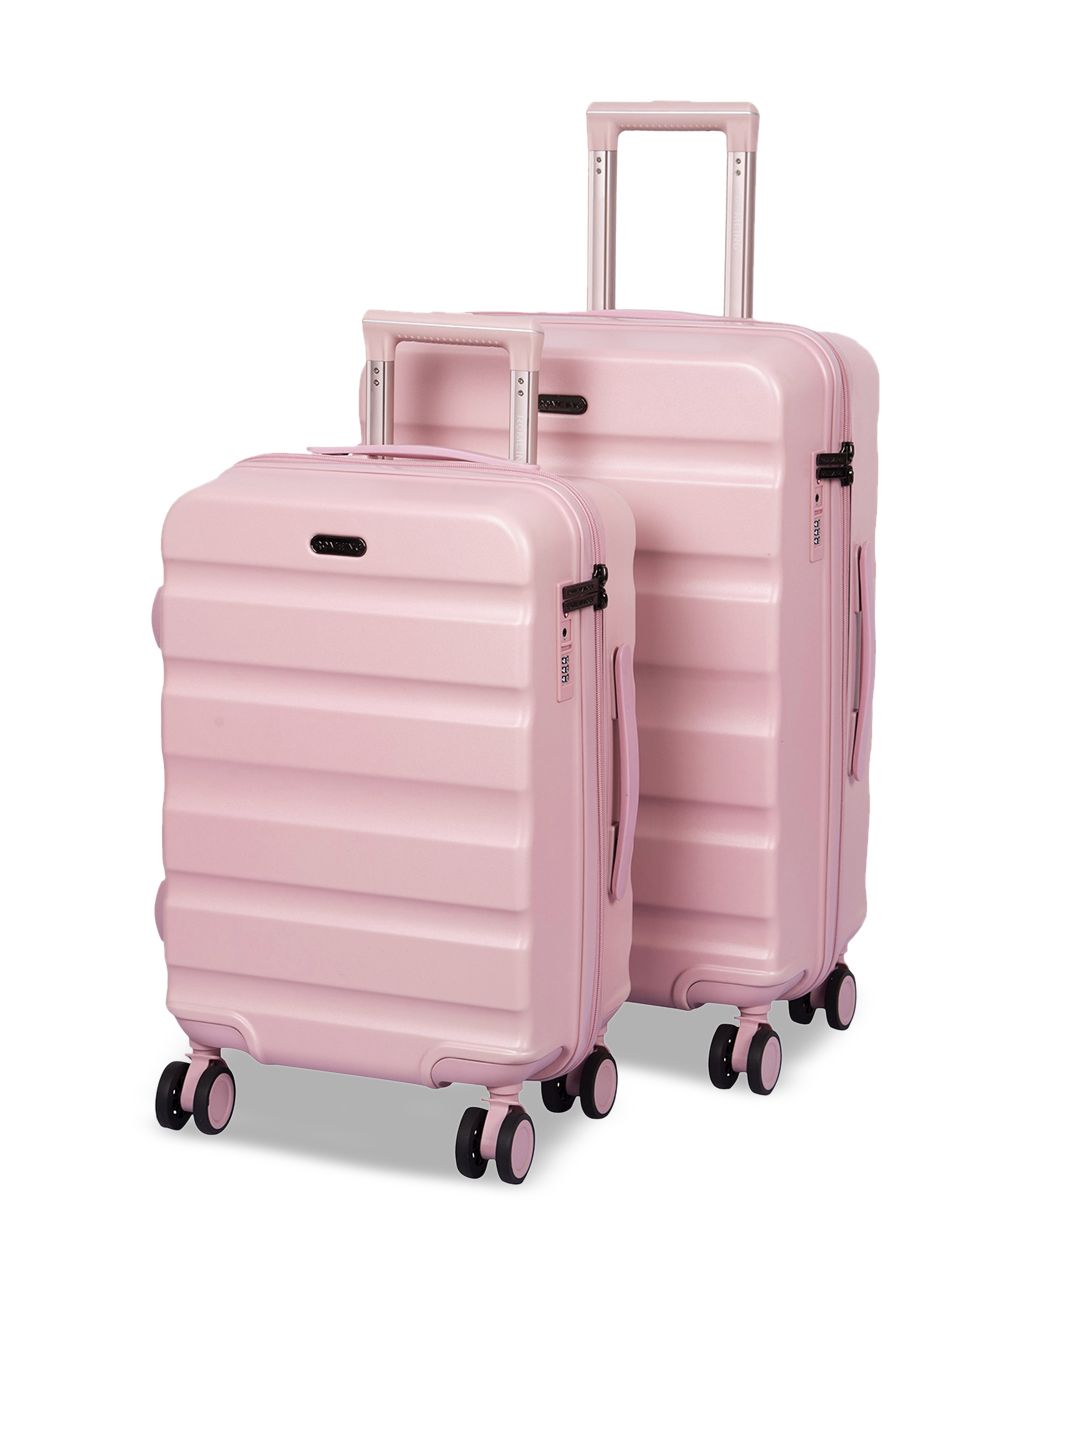 ROMEING Venice Set of 2 Pink Textured Hard-Sided Polycarbonate Trolley Suitcases Price in India